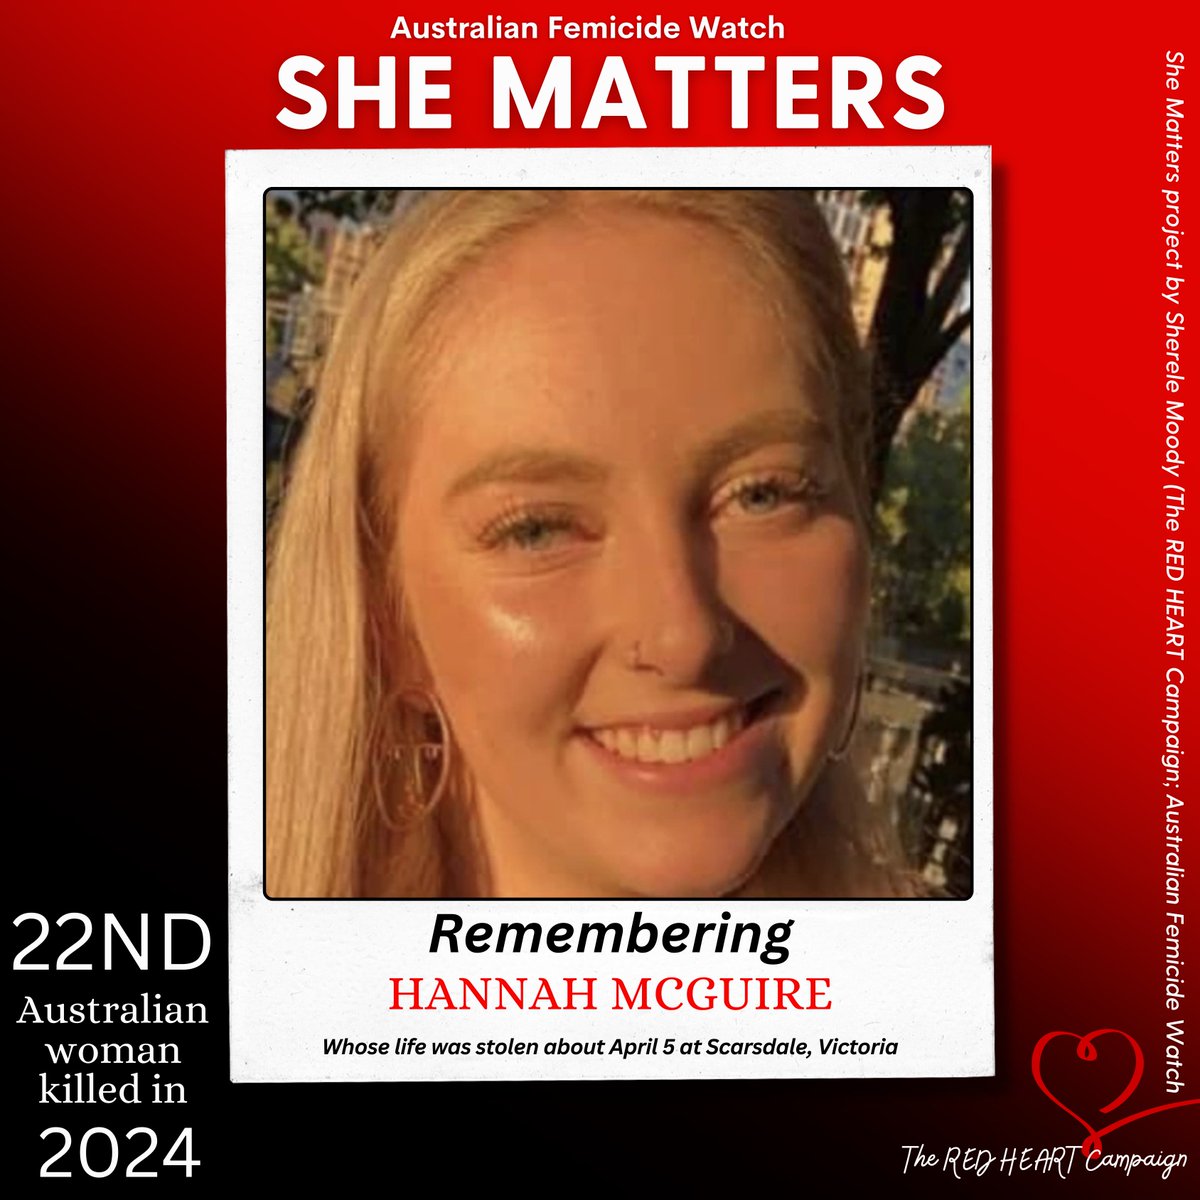 ❤️SHE MATTERS: HANNAH McGUIRE!❤️ Hannah McGuire was a 23-year-old woman with her whole life ahead of her - she overflowed with all the promises of youth: Hope, achievement, love, community, friendship, career, fun and everything else every young women deserves. But all of this